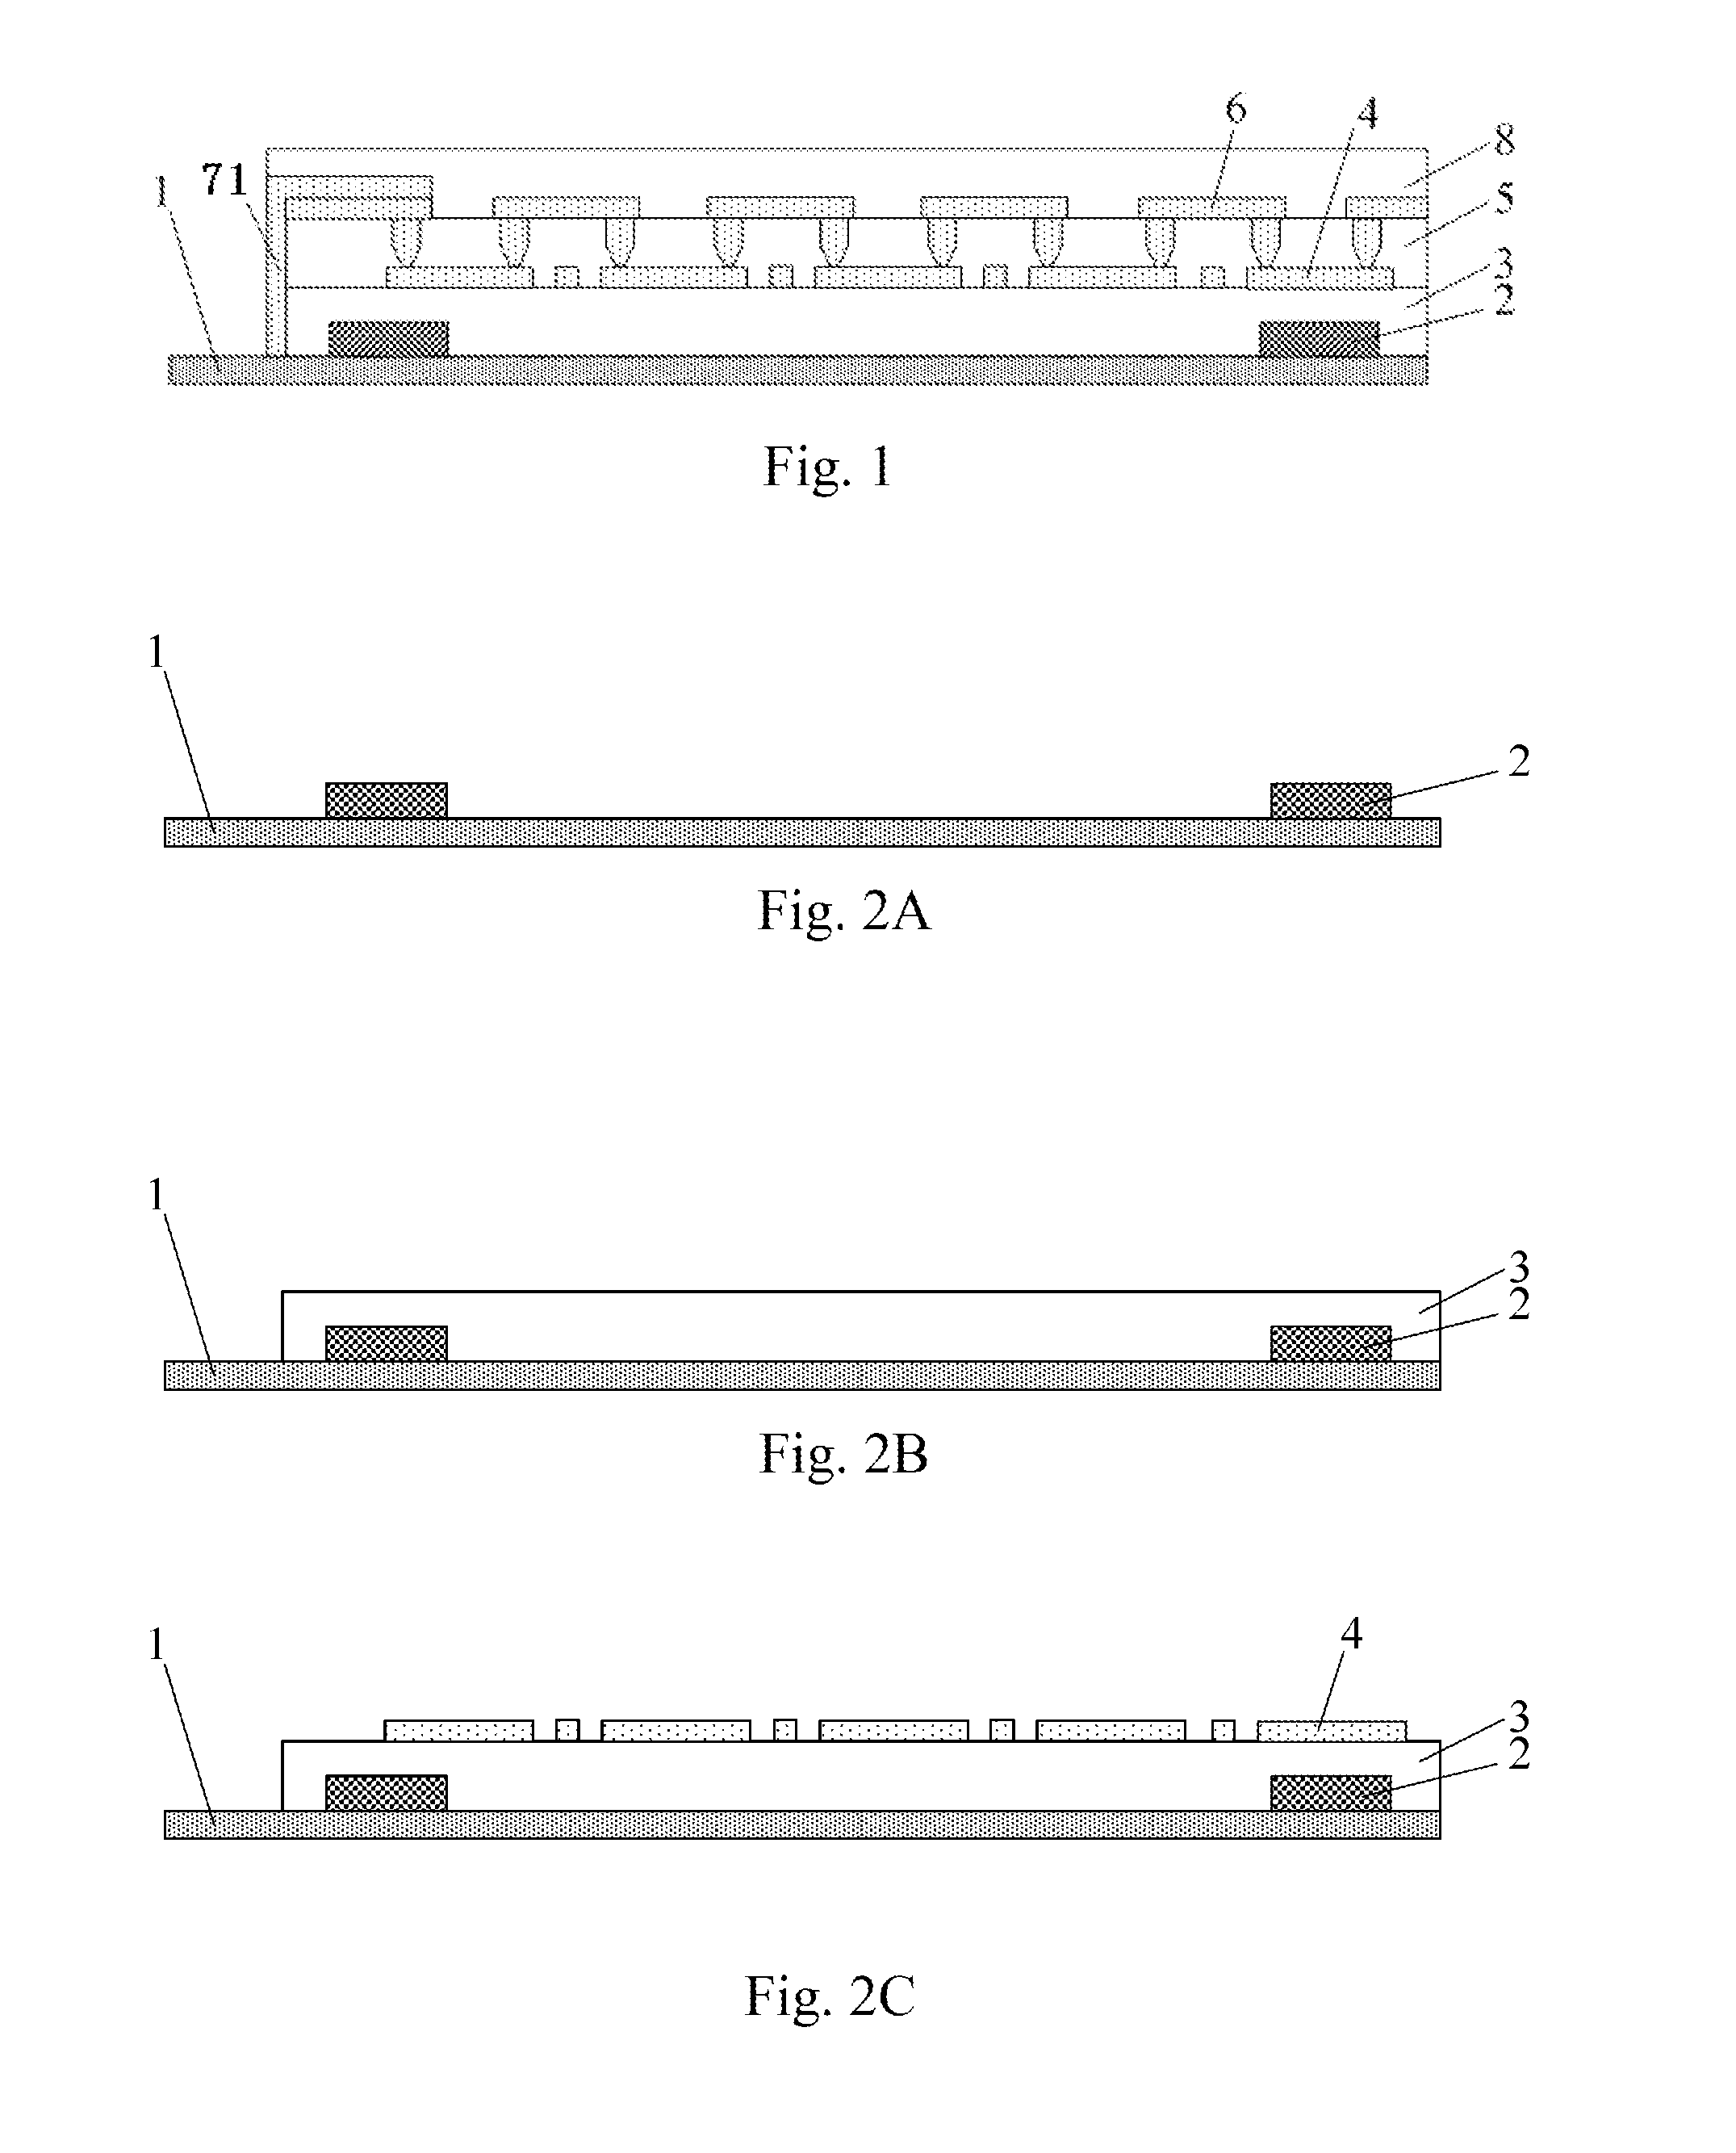 Ogs touch screen substrate and method of manufacturing the same, and related apparatus